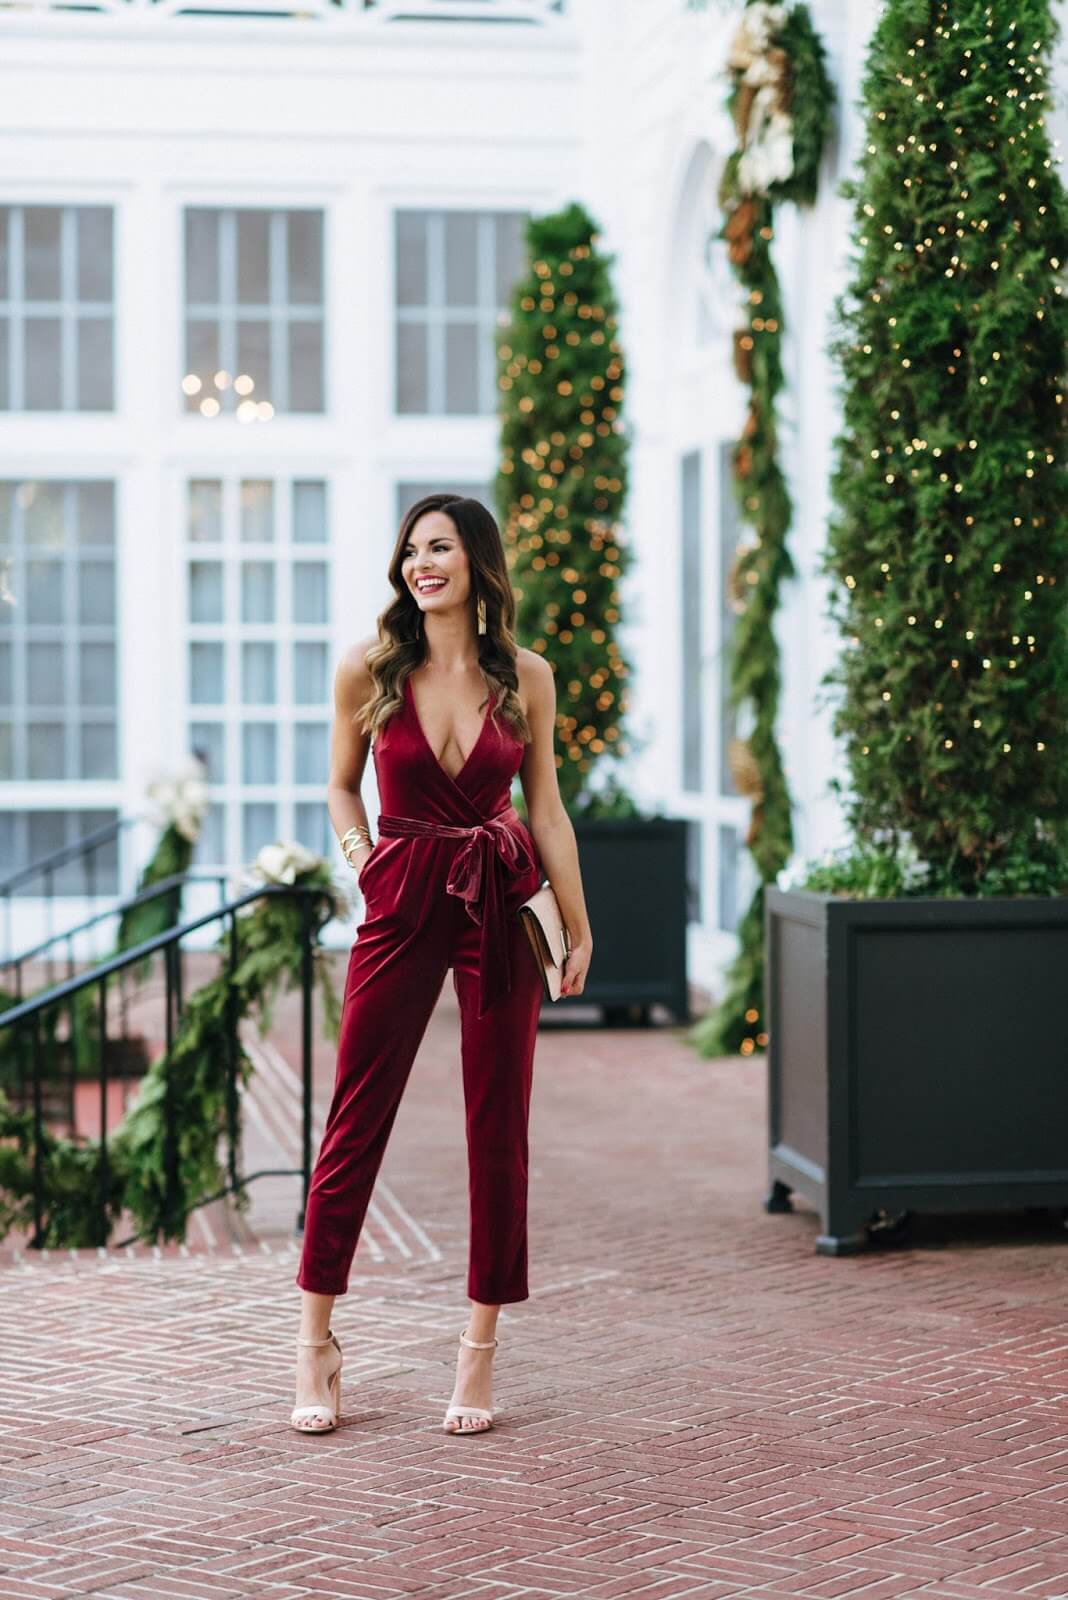 woman in red velvet jumpsuit in front of building with large windows